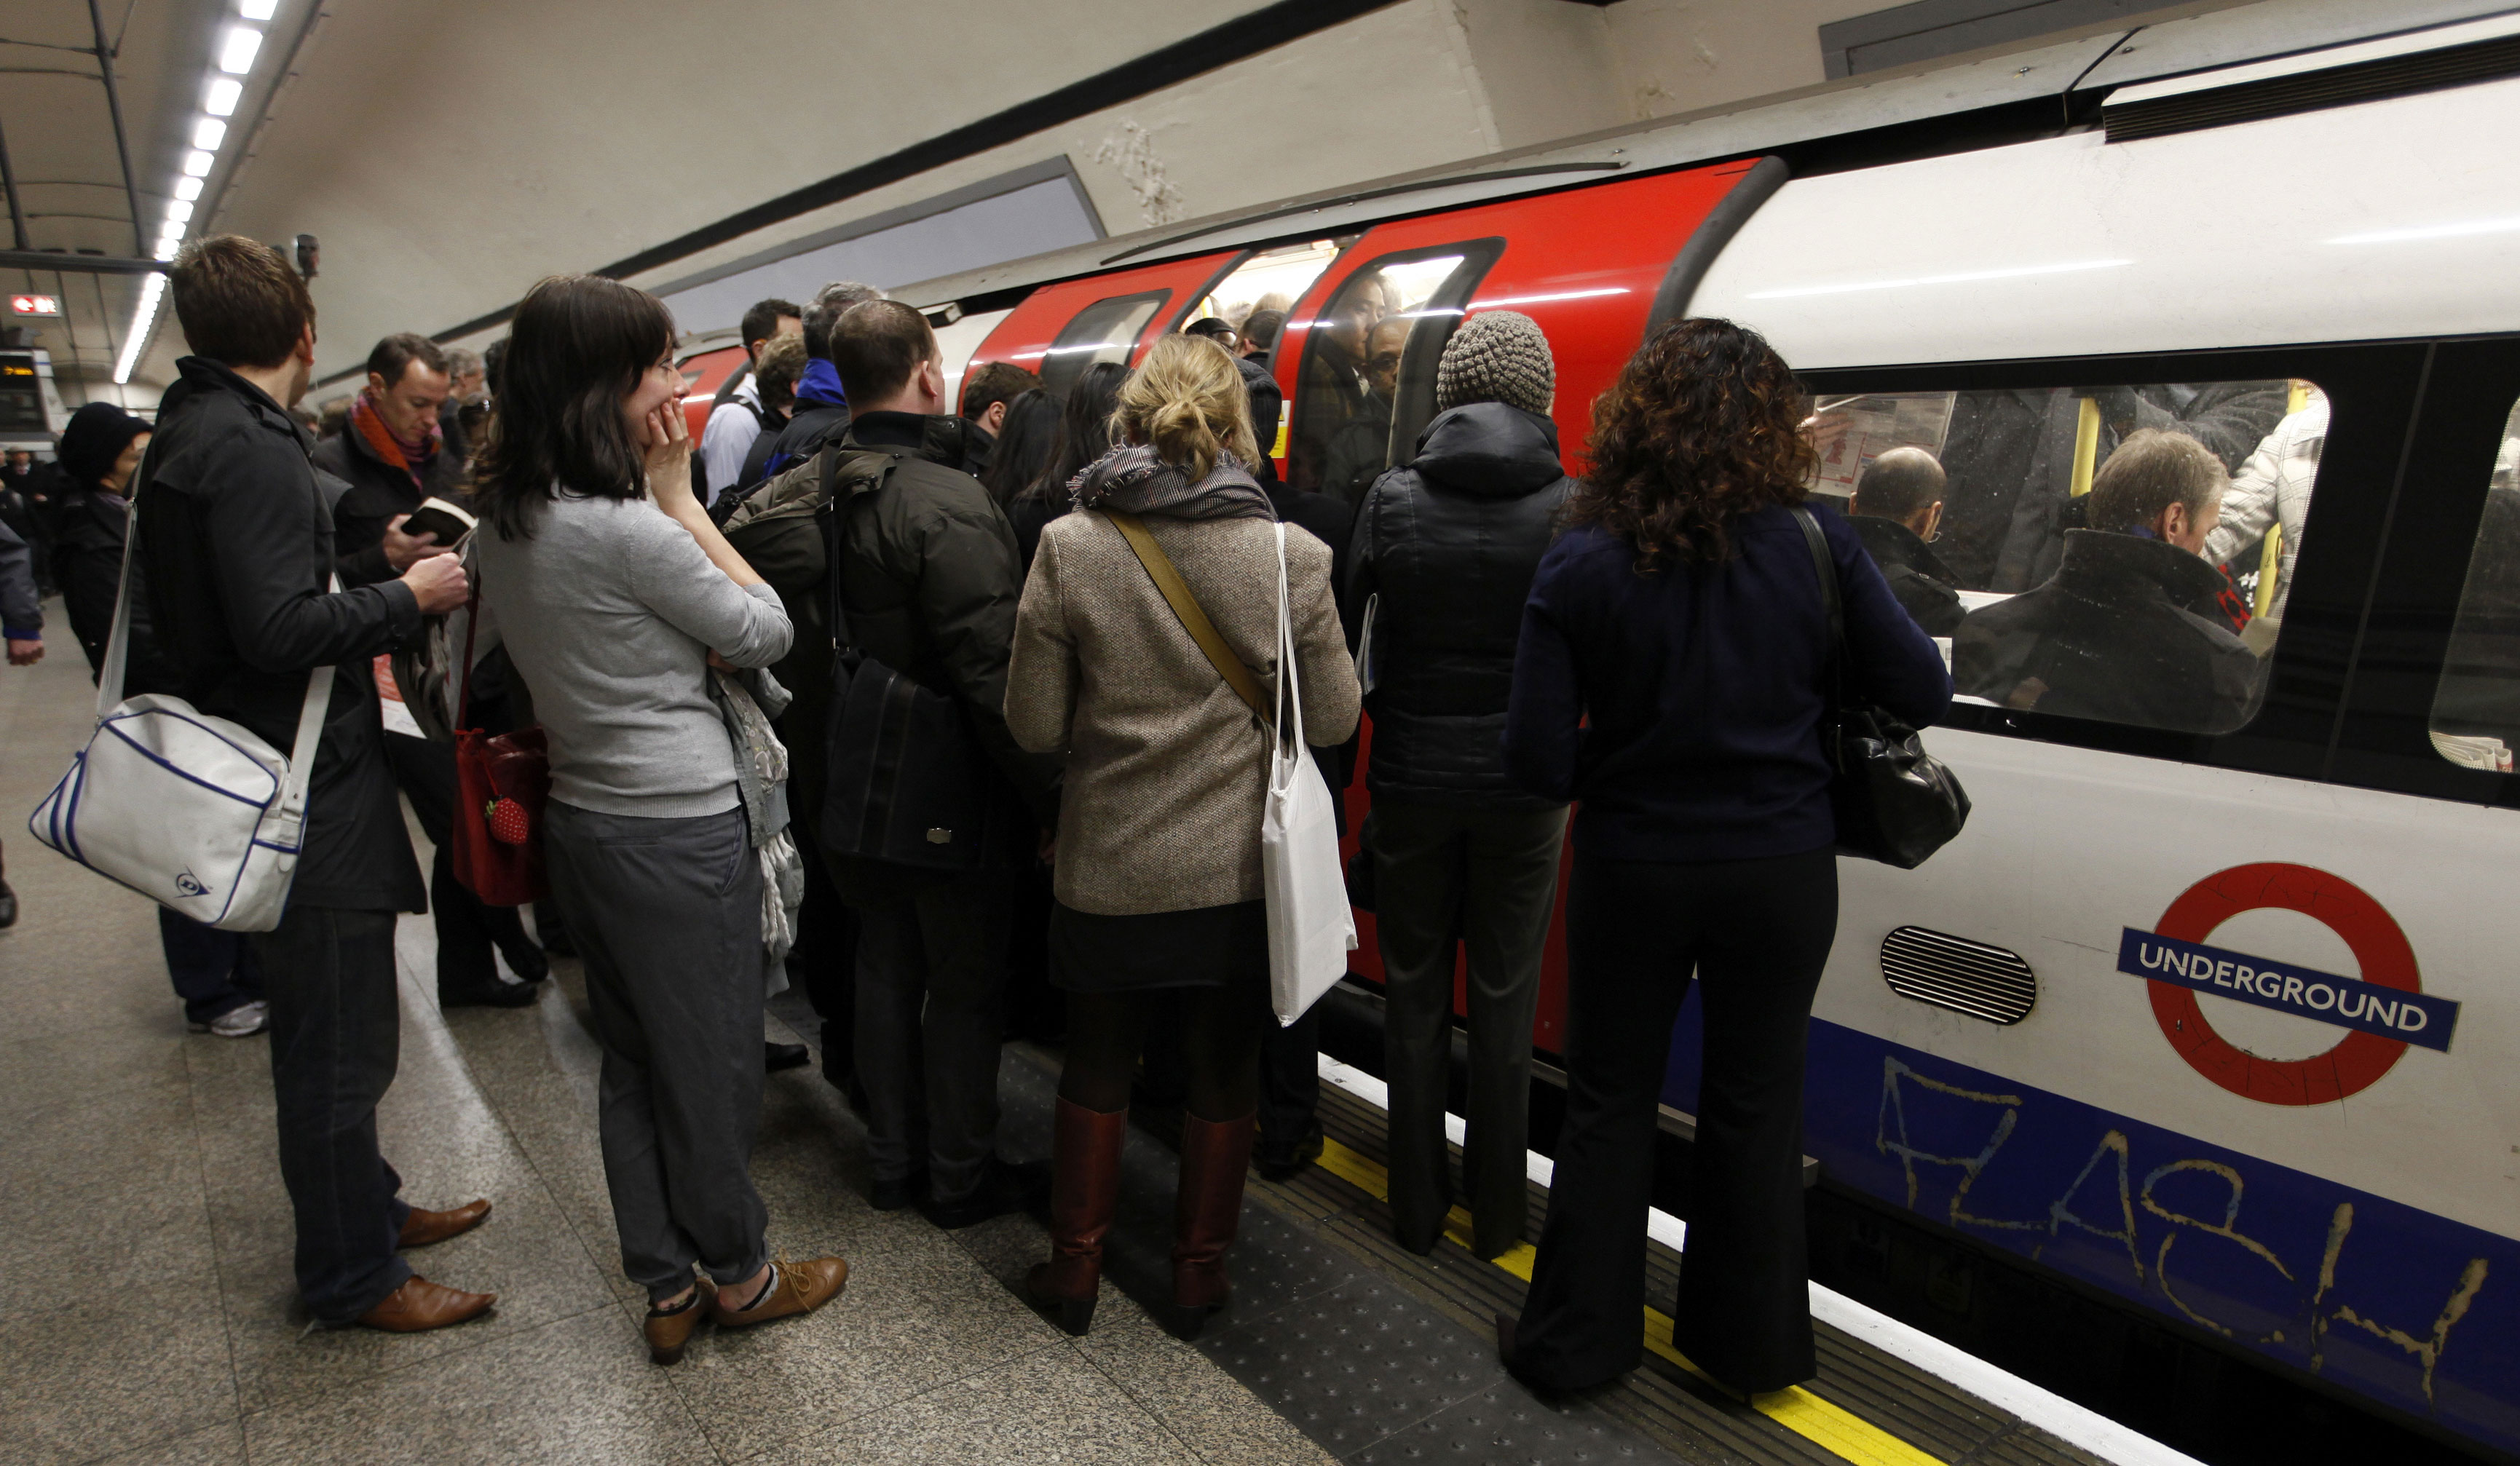 Transport for London warns 'significant disruption' is likely on the Tube during a Boxing Day strike by train drivers' union Aslef over holiday working conditions and pay. 